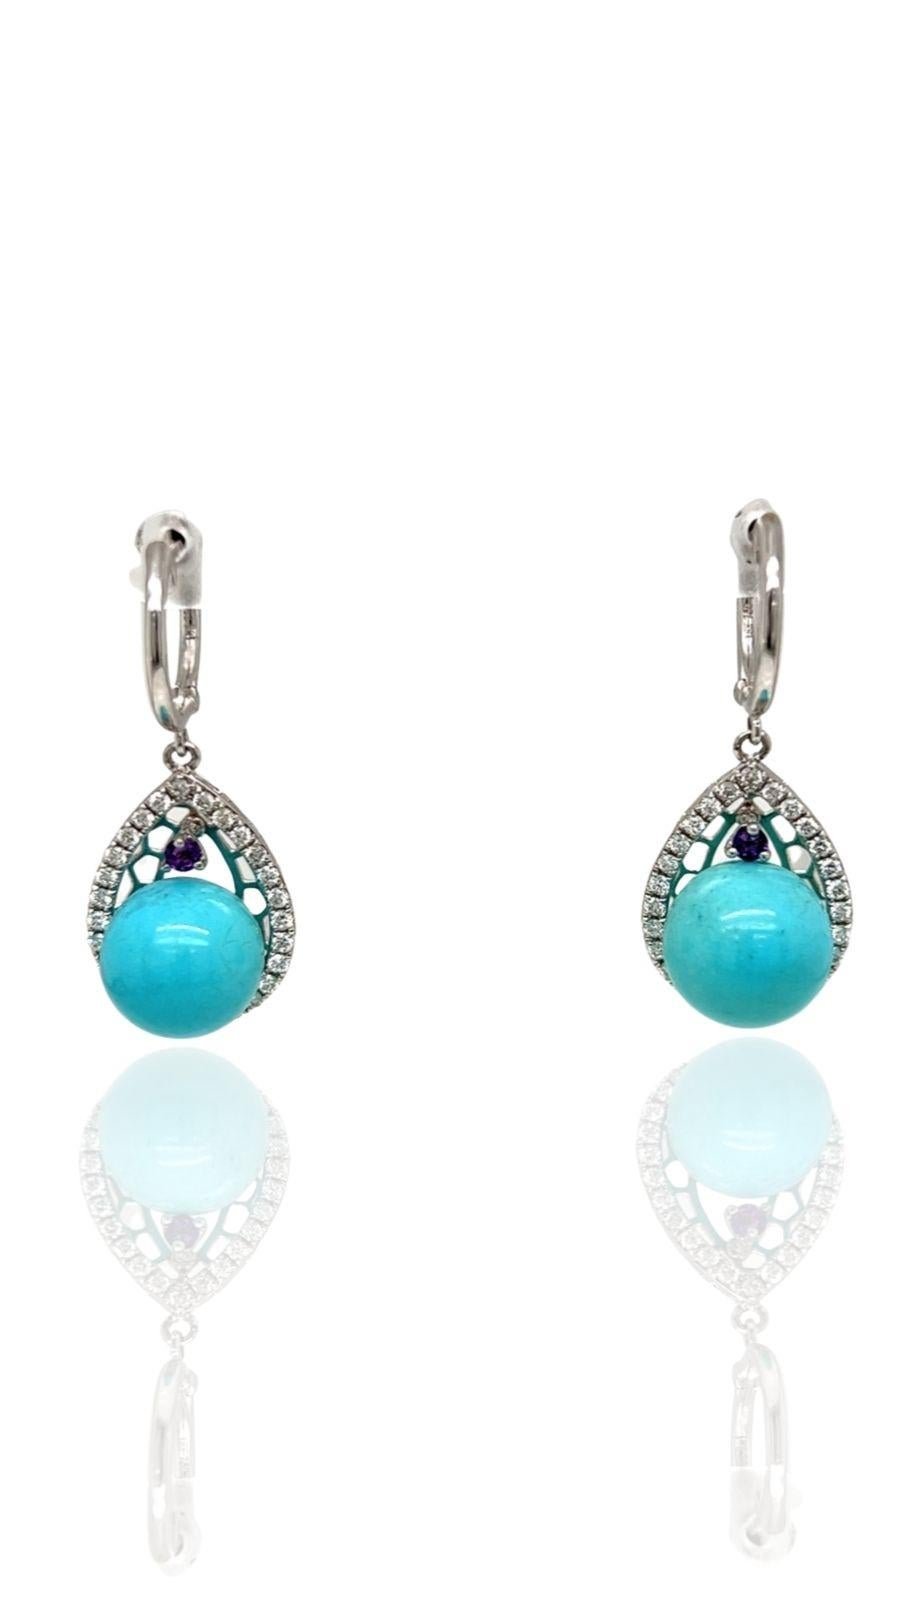 Serene turquoise earrings accented by 54 round diamonds at .53 ctw, VS-SI in clarity, H-I in color.  A .09 ctw amethyst adds color. Perfect for turquoise collectors or a birthday gift.  Appropriate for any occasion. Set in 3.5 grams of 14K white